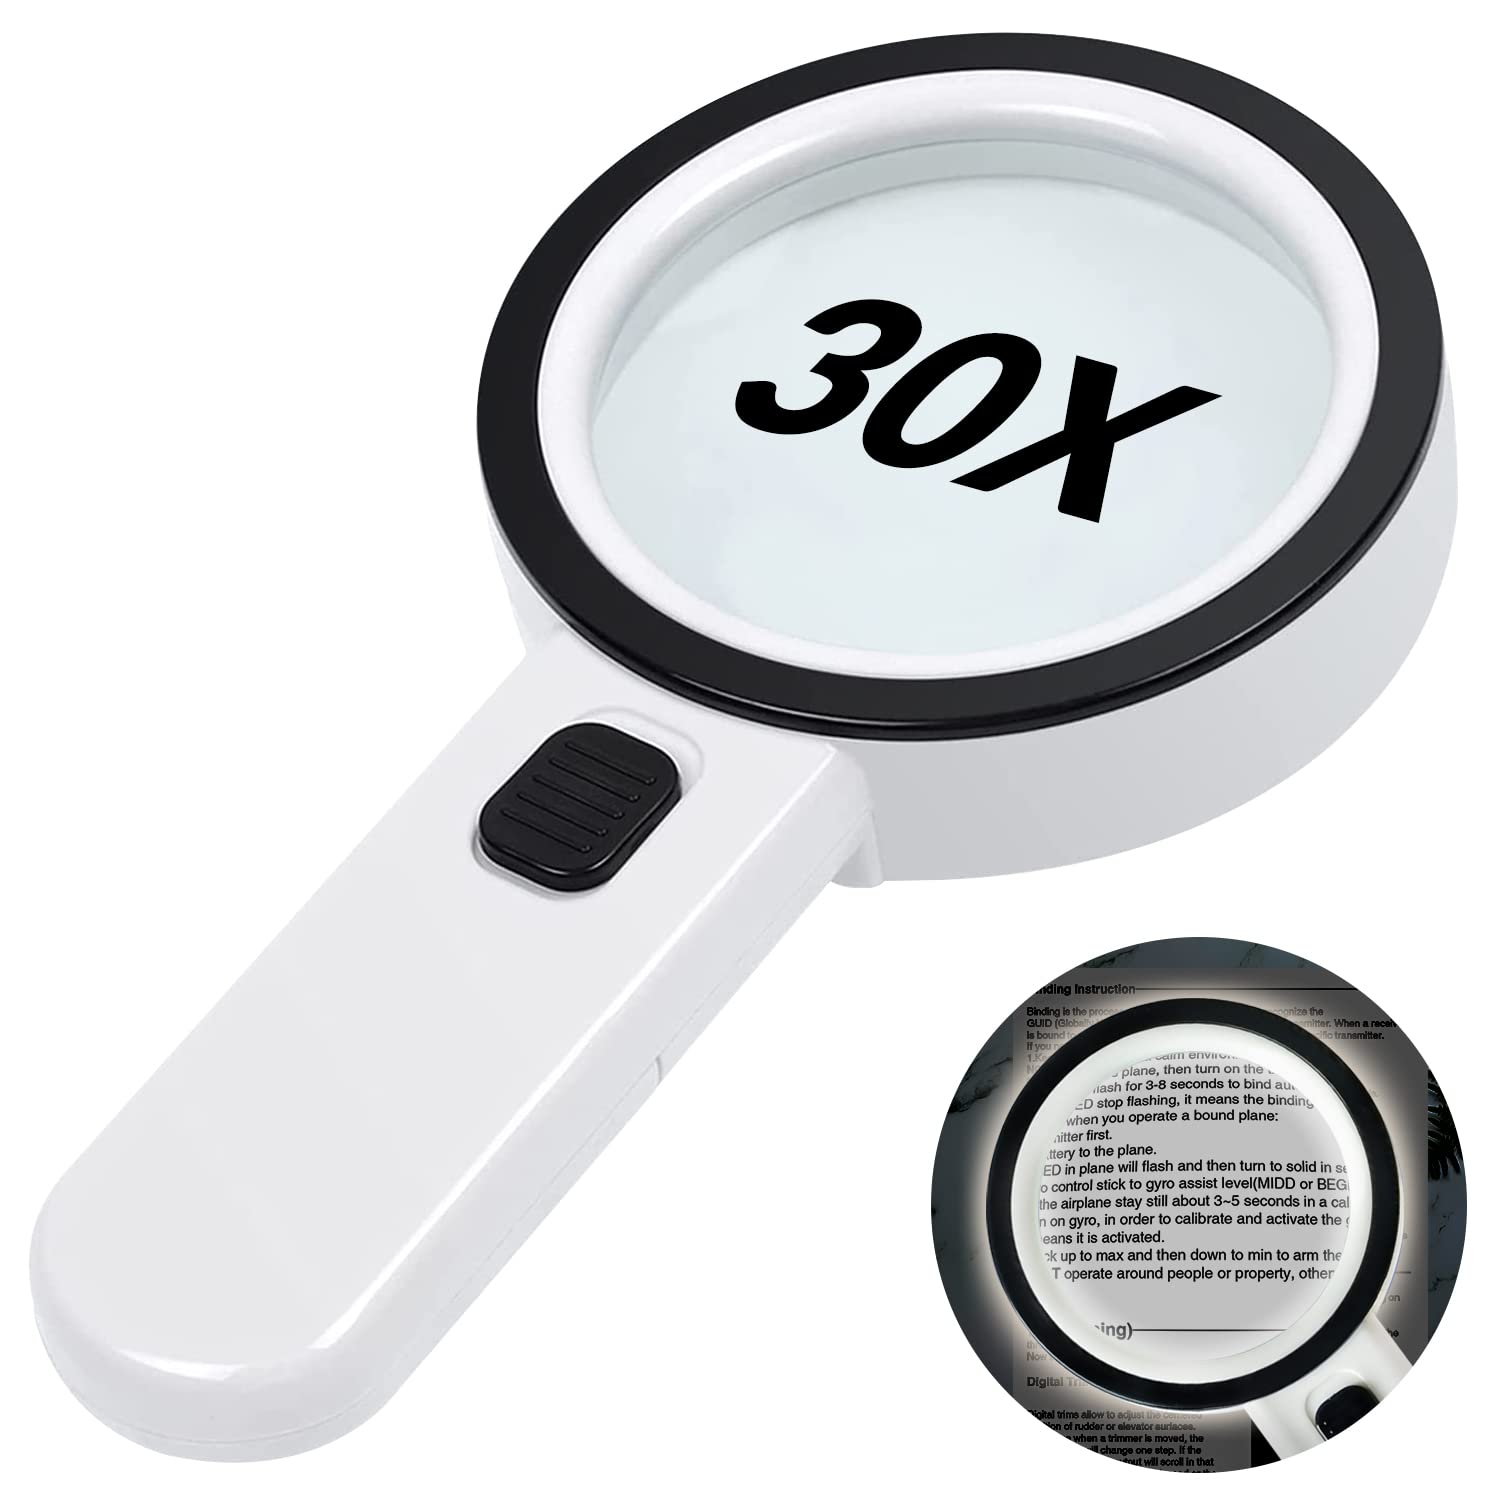 Magnifying glass with a blurry application